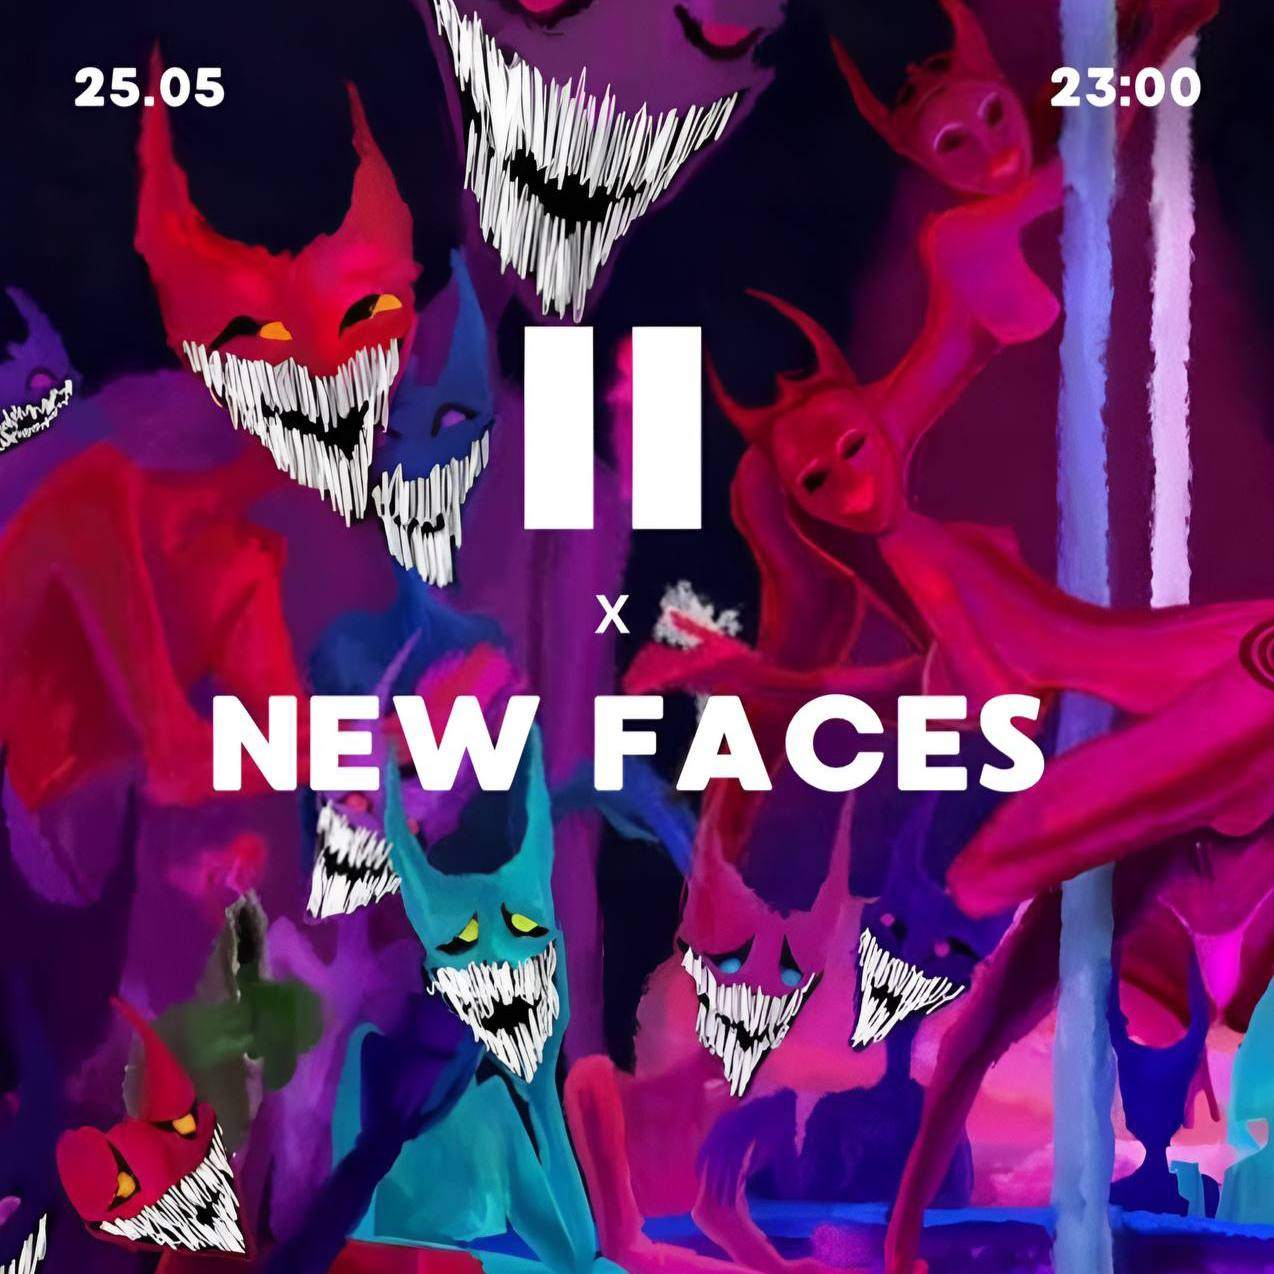 NEW FACES - フライヤー表